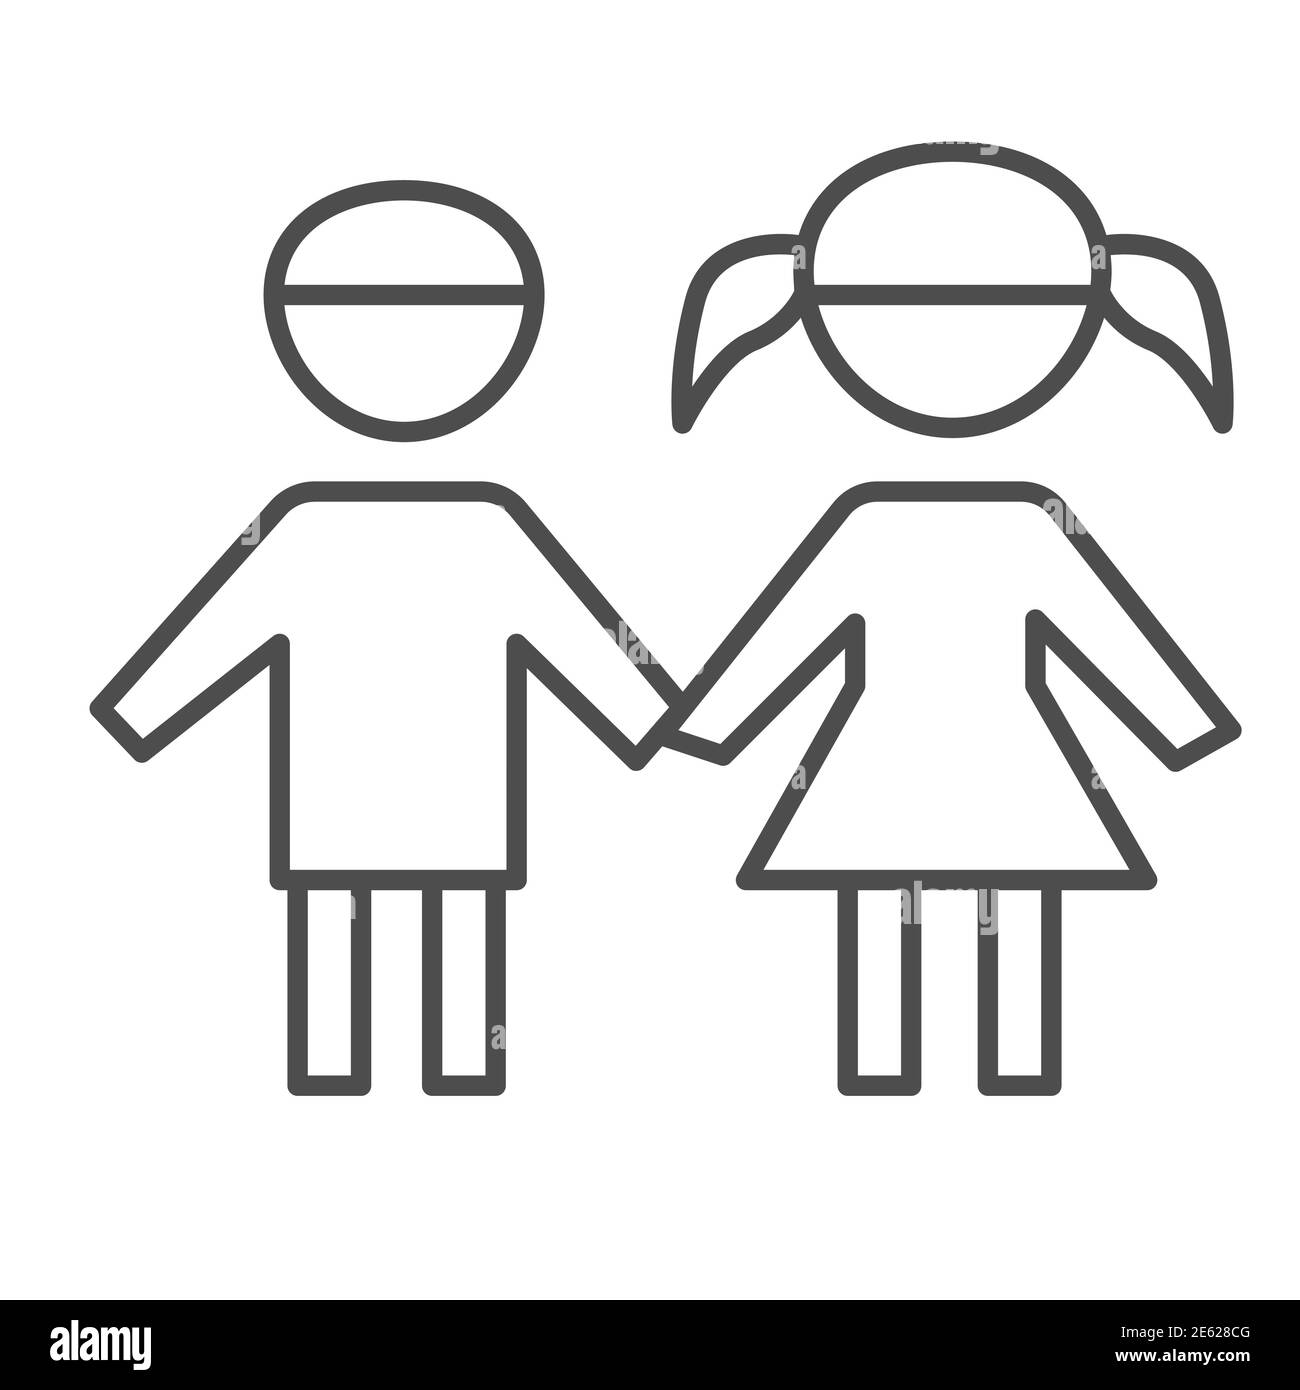 Boy and girl thin line icon, 1st June children protection day concept, children silhouettes sign on white background, Brother and sister symbol in Stock Vector